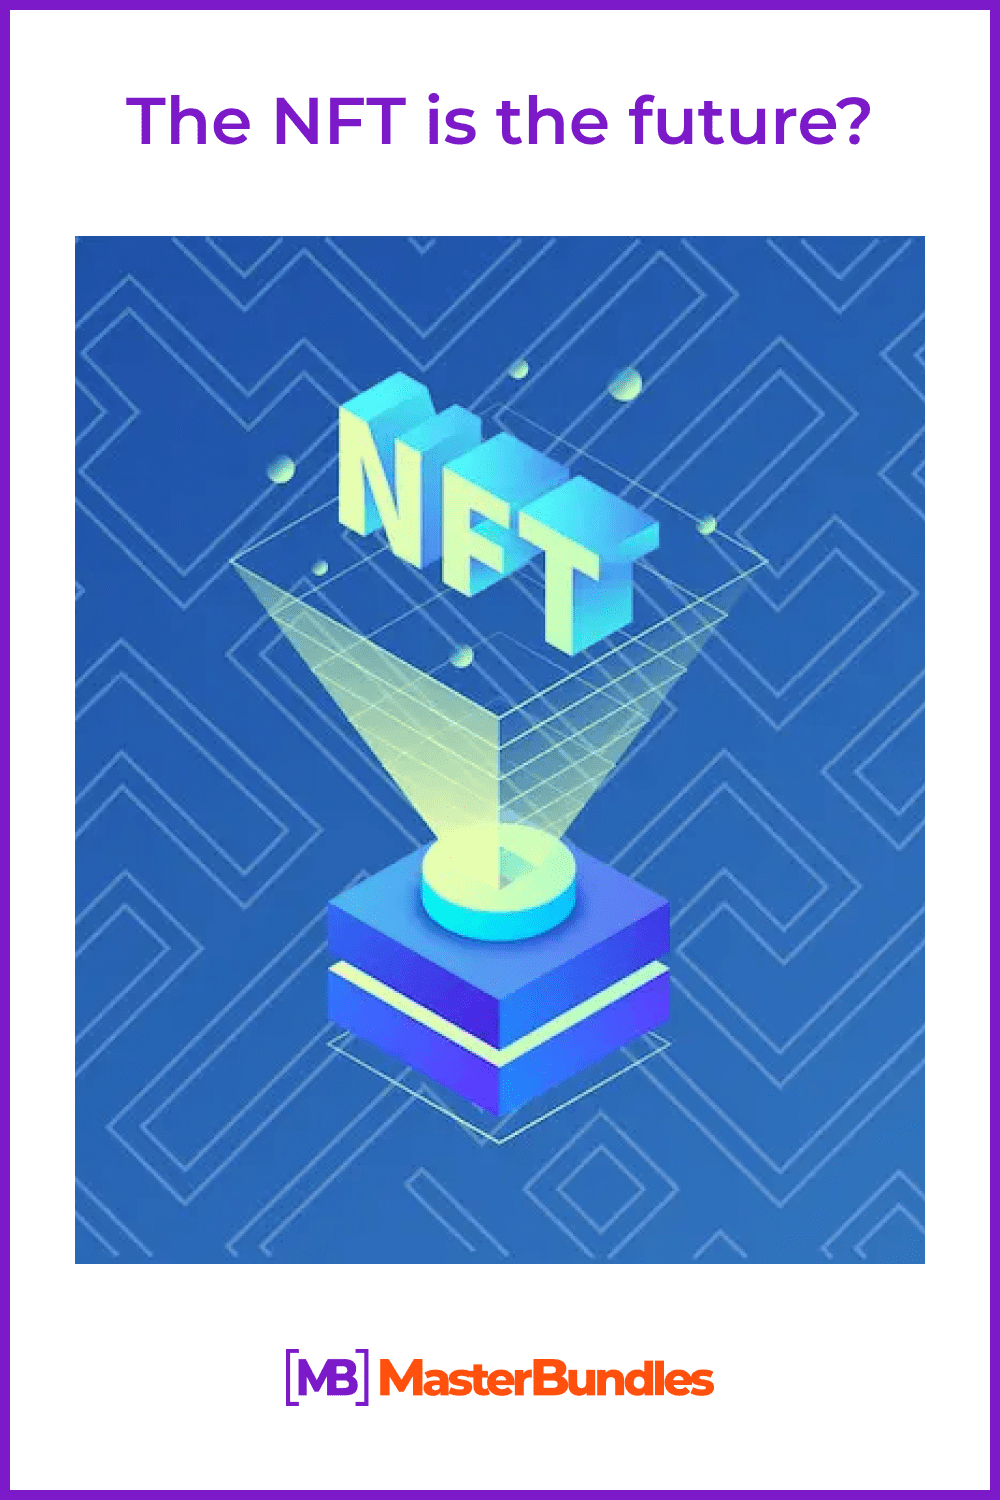 The NFT is the Future.